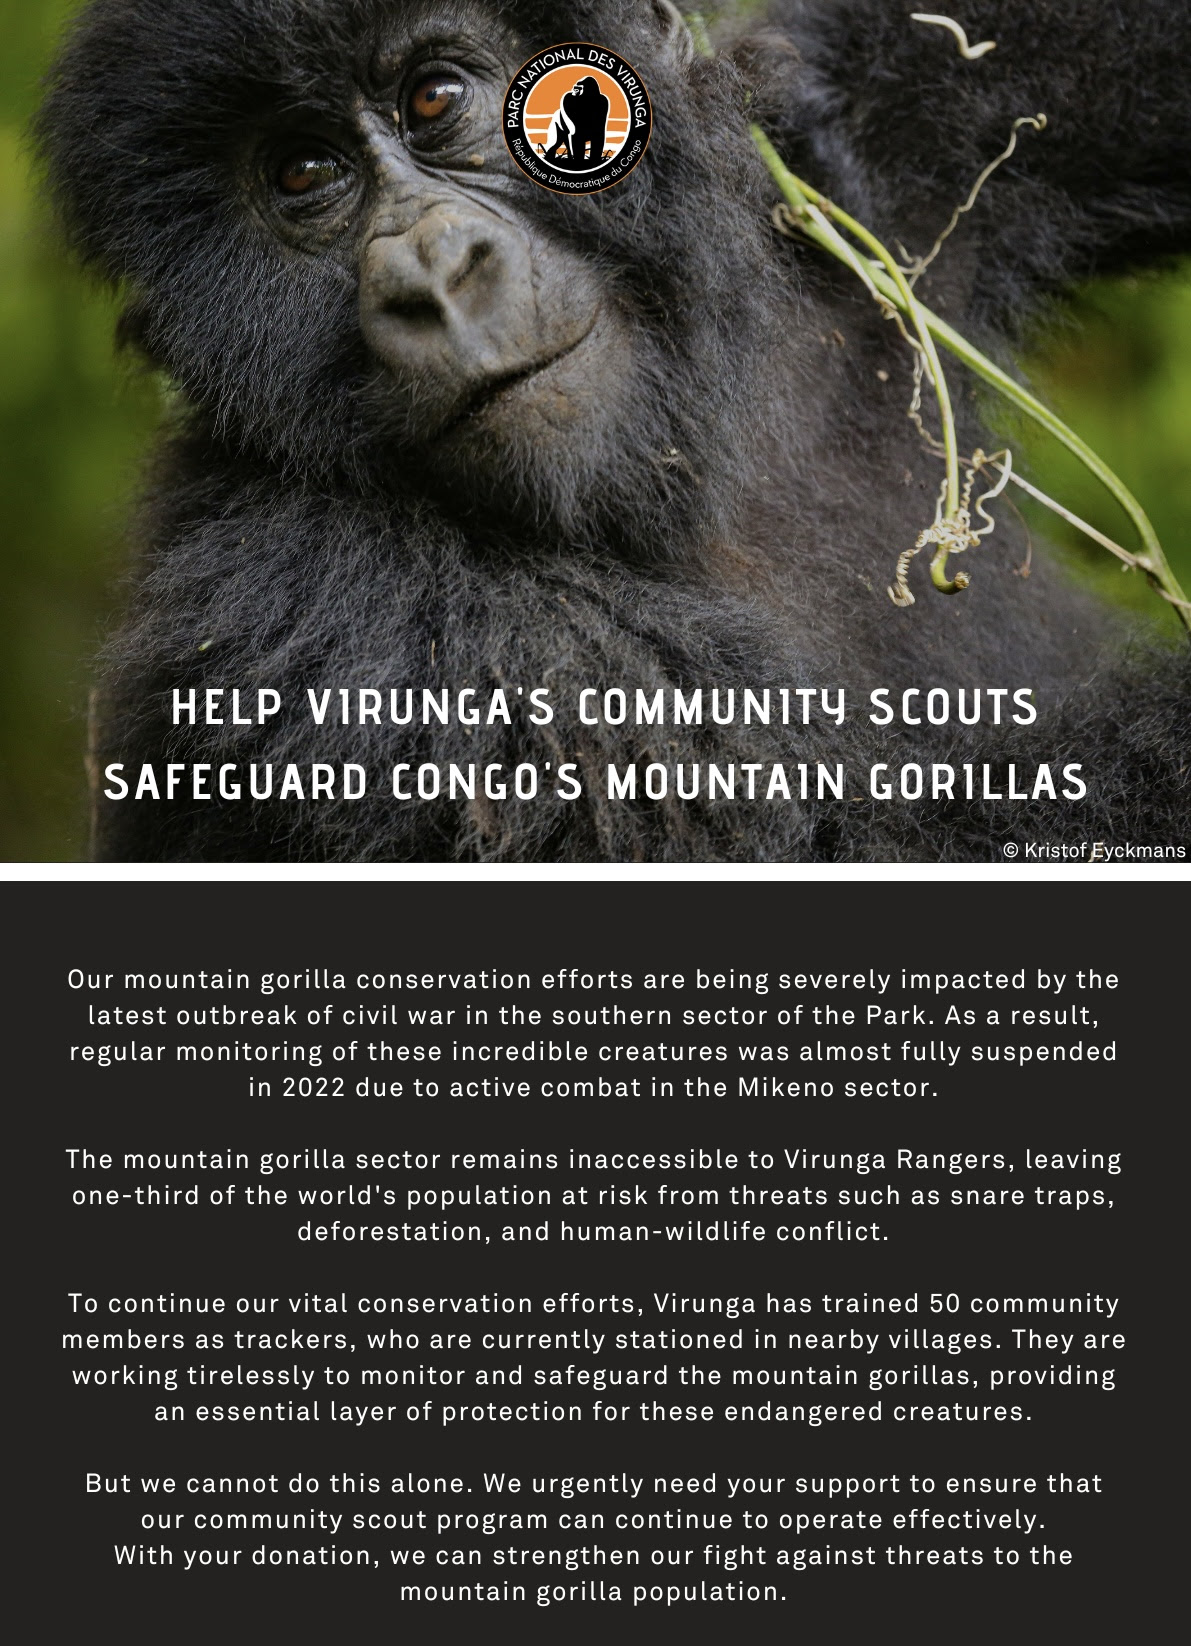 Our mountain gorilla conservation efforts are being severely impacted by the latest outbreak of civil war in the southern sector of the Park. As a result, regular monitoring of these incredible creatures was almost fully suspended in 2022 due to active combat in the Mikeno sector.